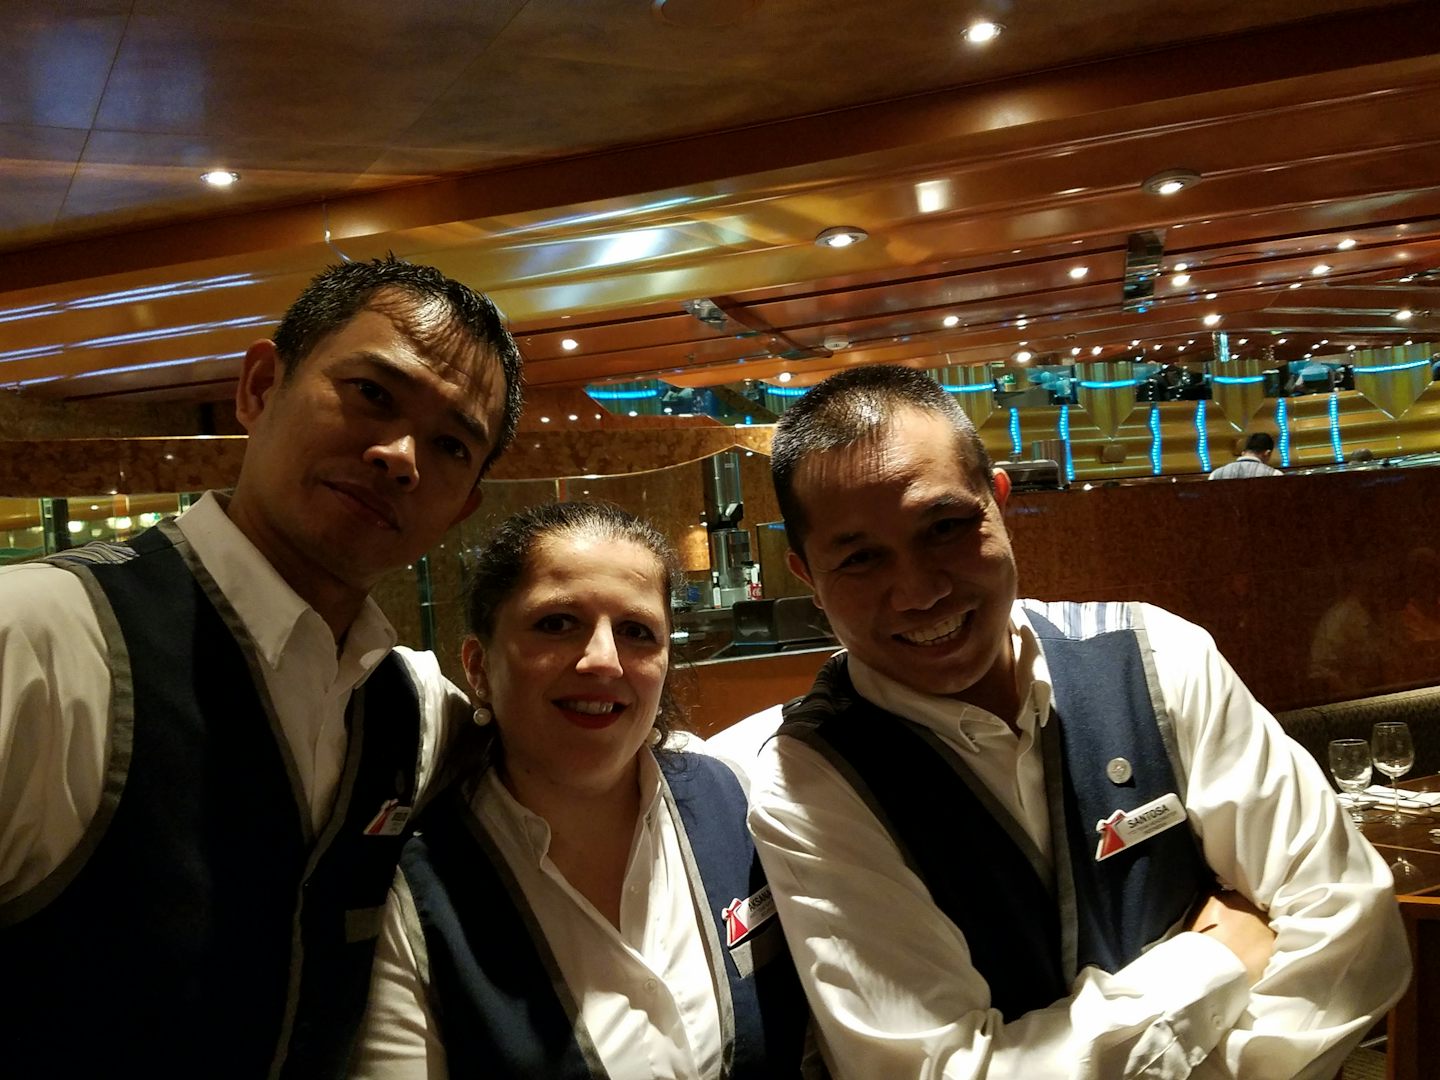 Our dining room staff!